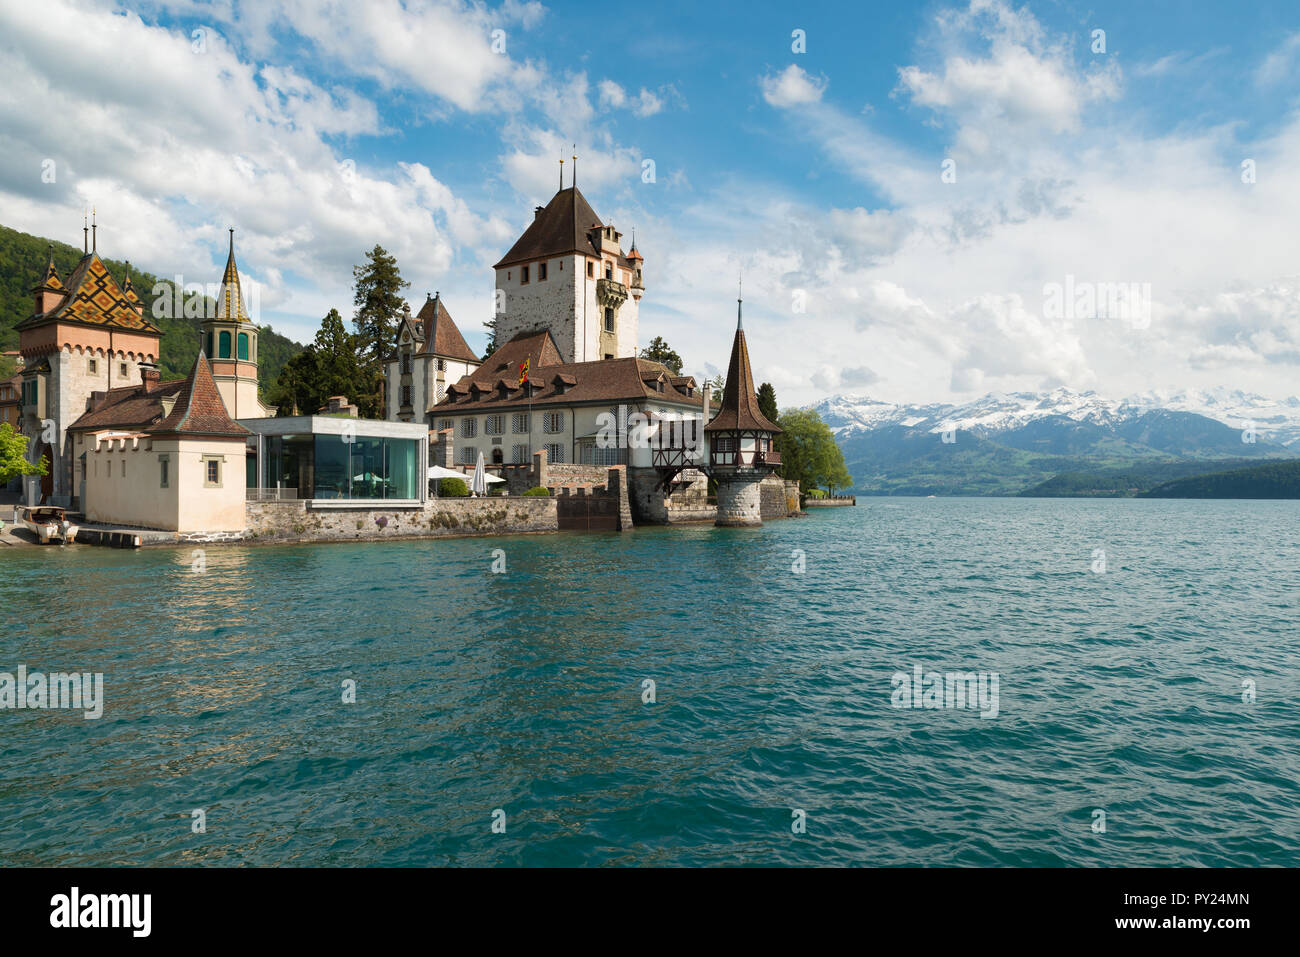 Beautiful little tower of Oberhofen castle in the Thun lake with mountains on background in Switzerland, near Bern Stock Photo